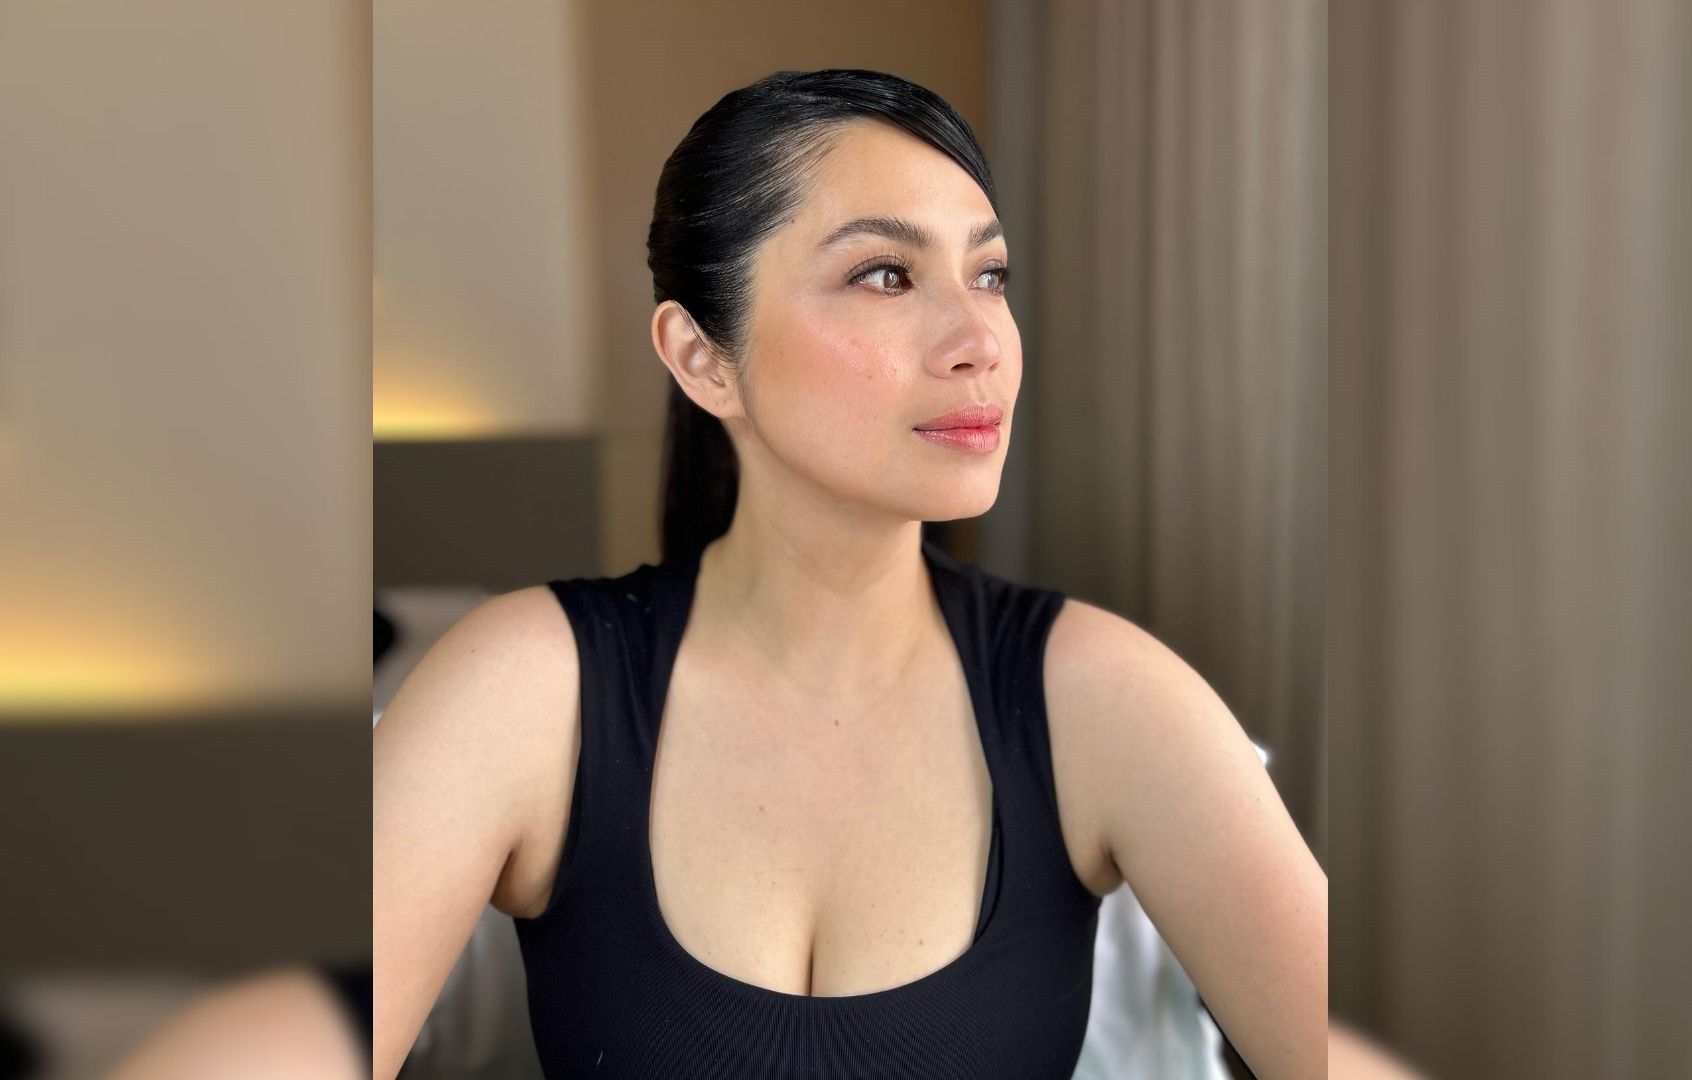 Diana Zubiri looks back at controversial FHM flyover shoot